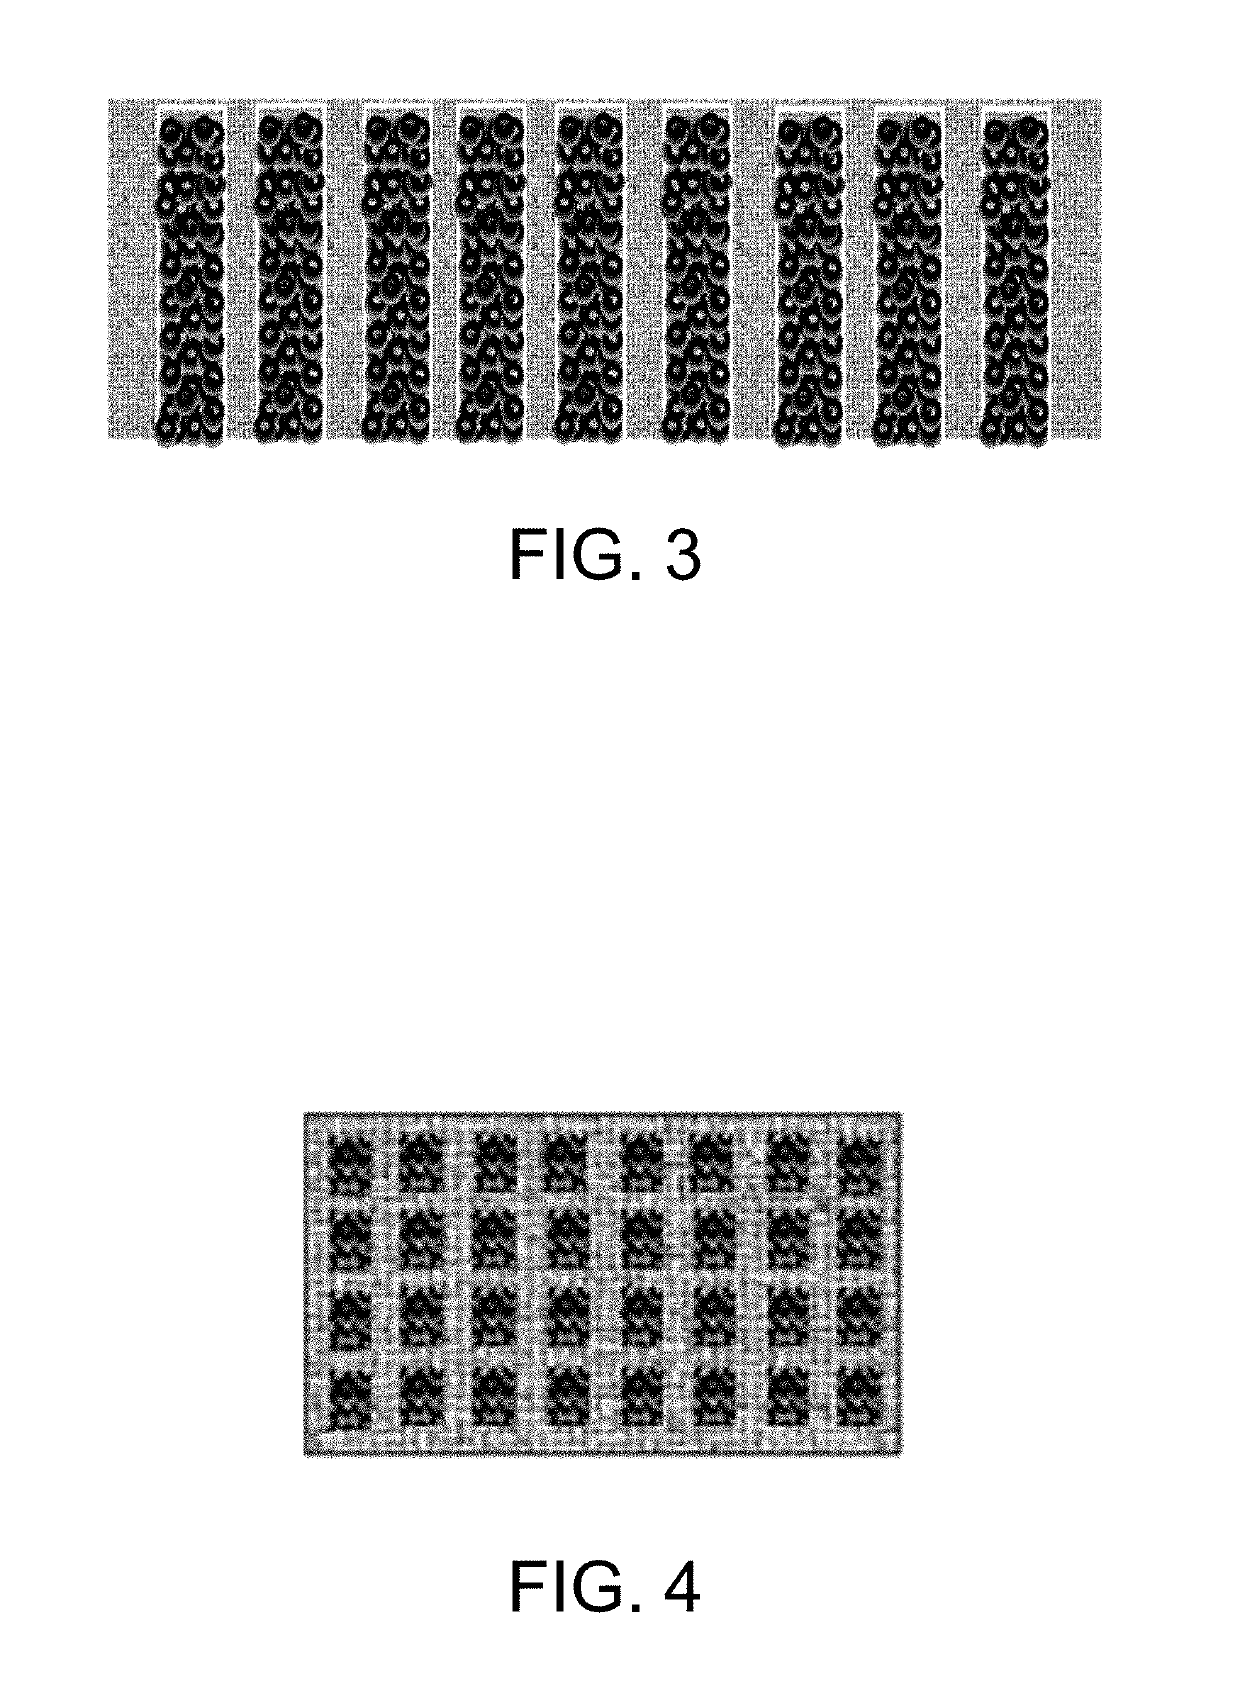 Foam skeleton reinforced composite, preparation method therefor, and application thereof